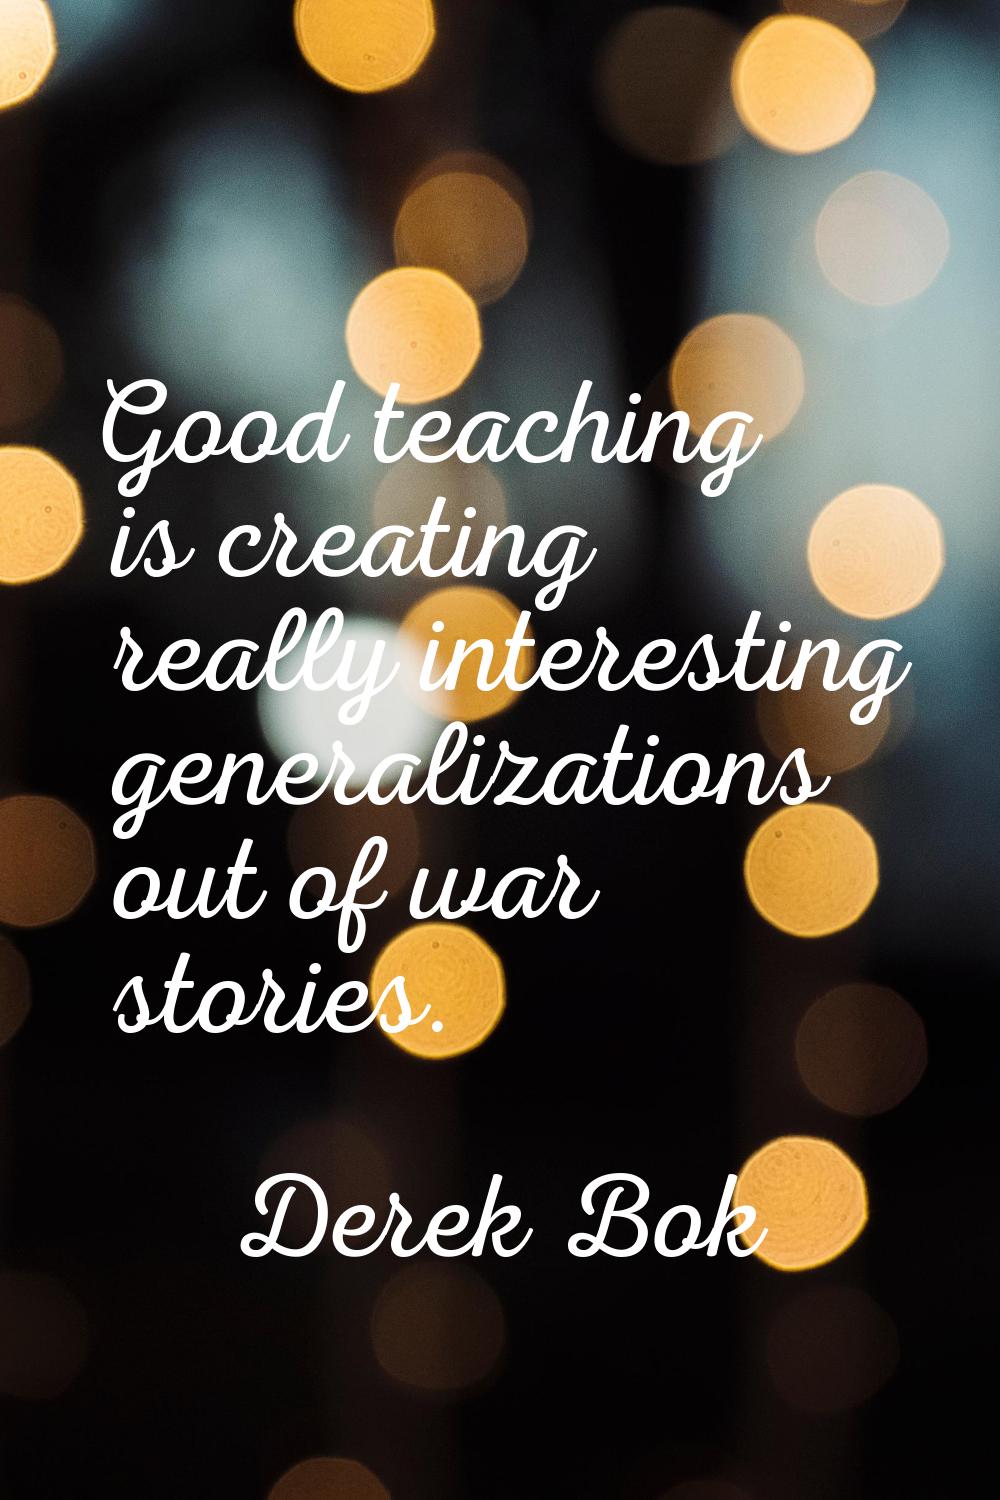 Good teaching is creating really interesting generalizations out of war stories.